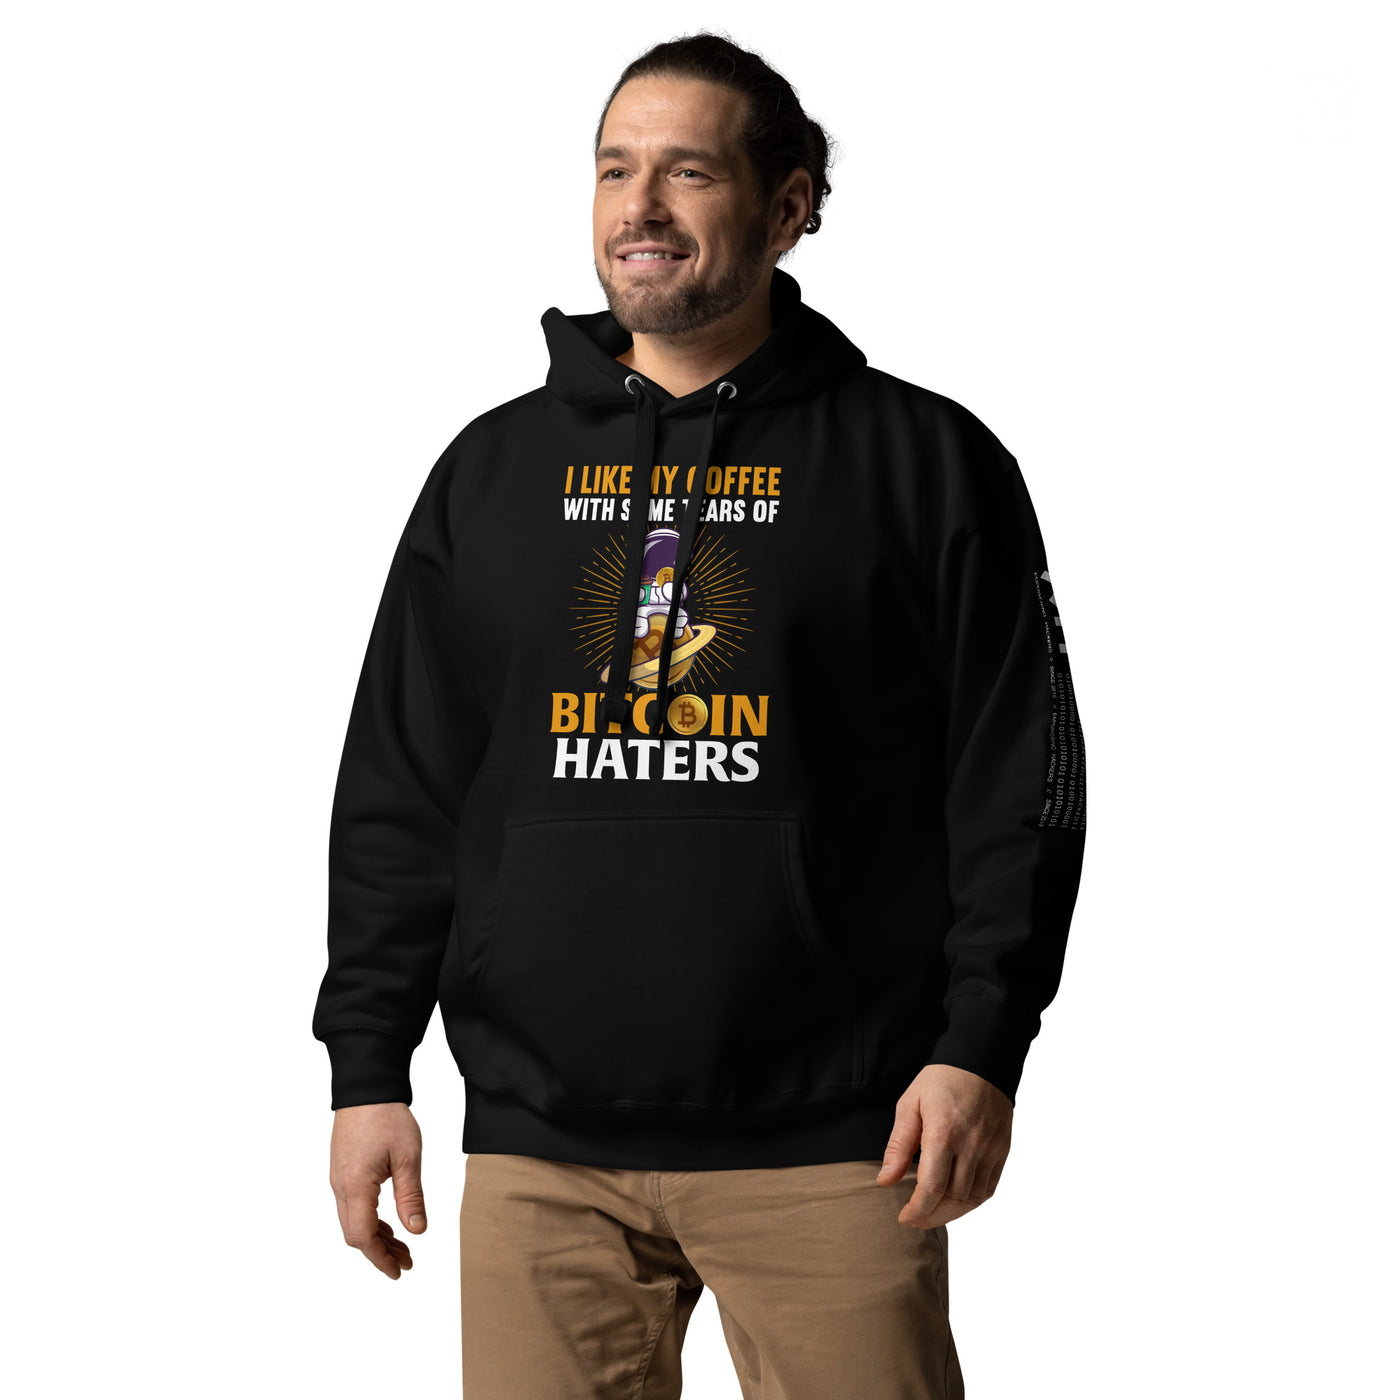 I like my Coffee with some tears of Bitcoin Haters - Unisex Hoodie